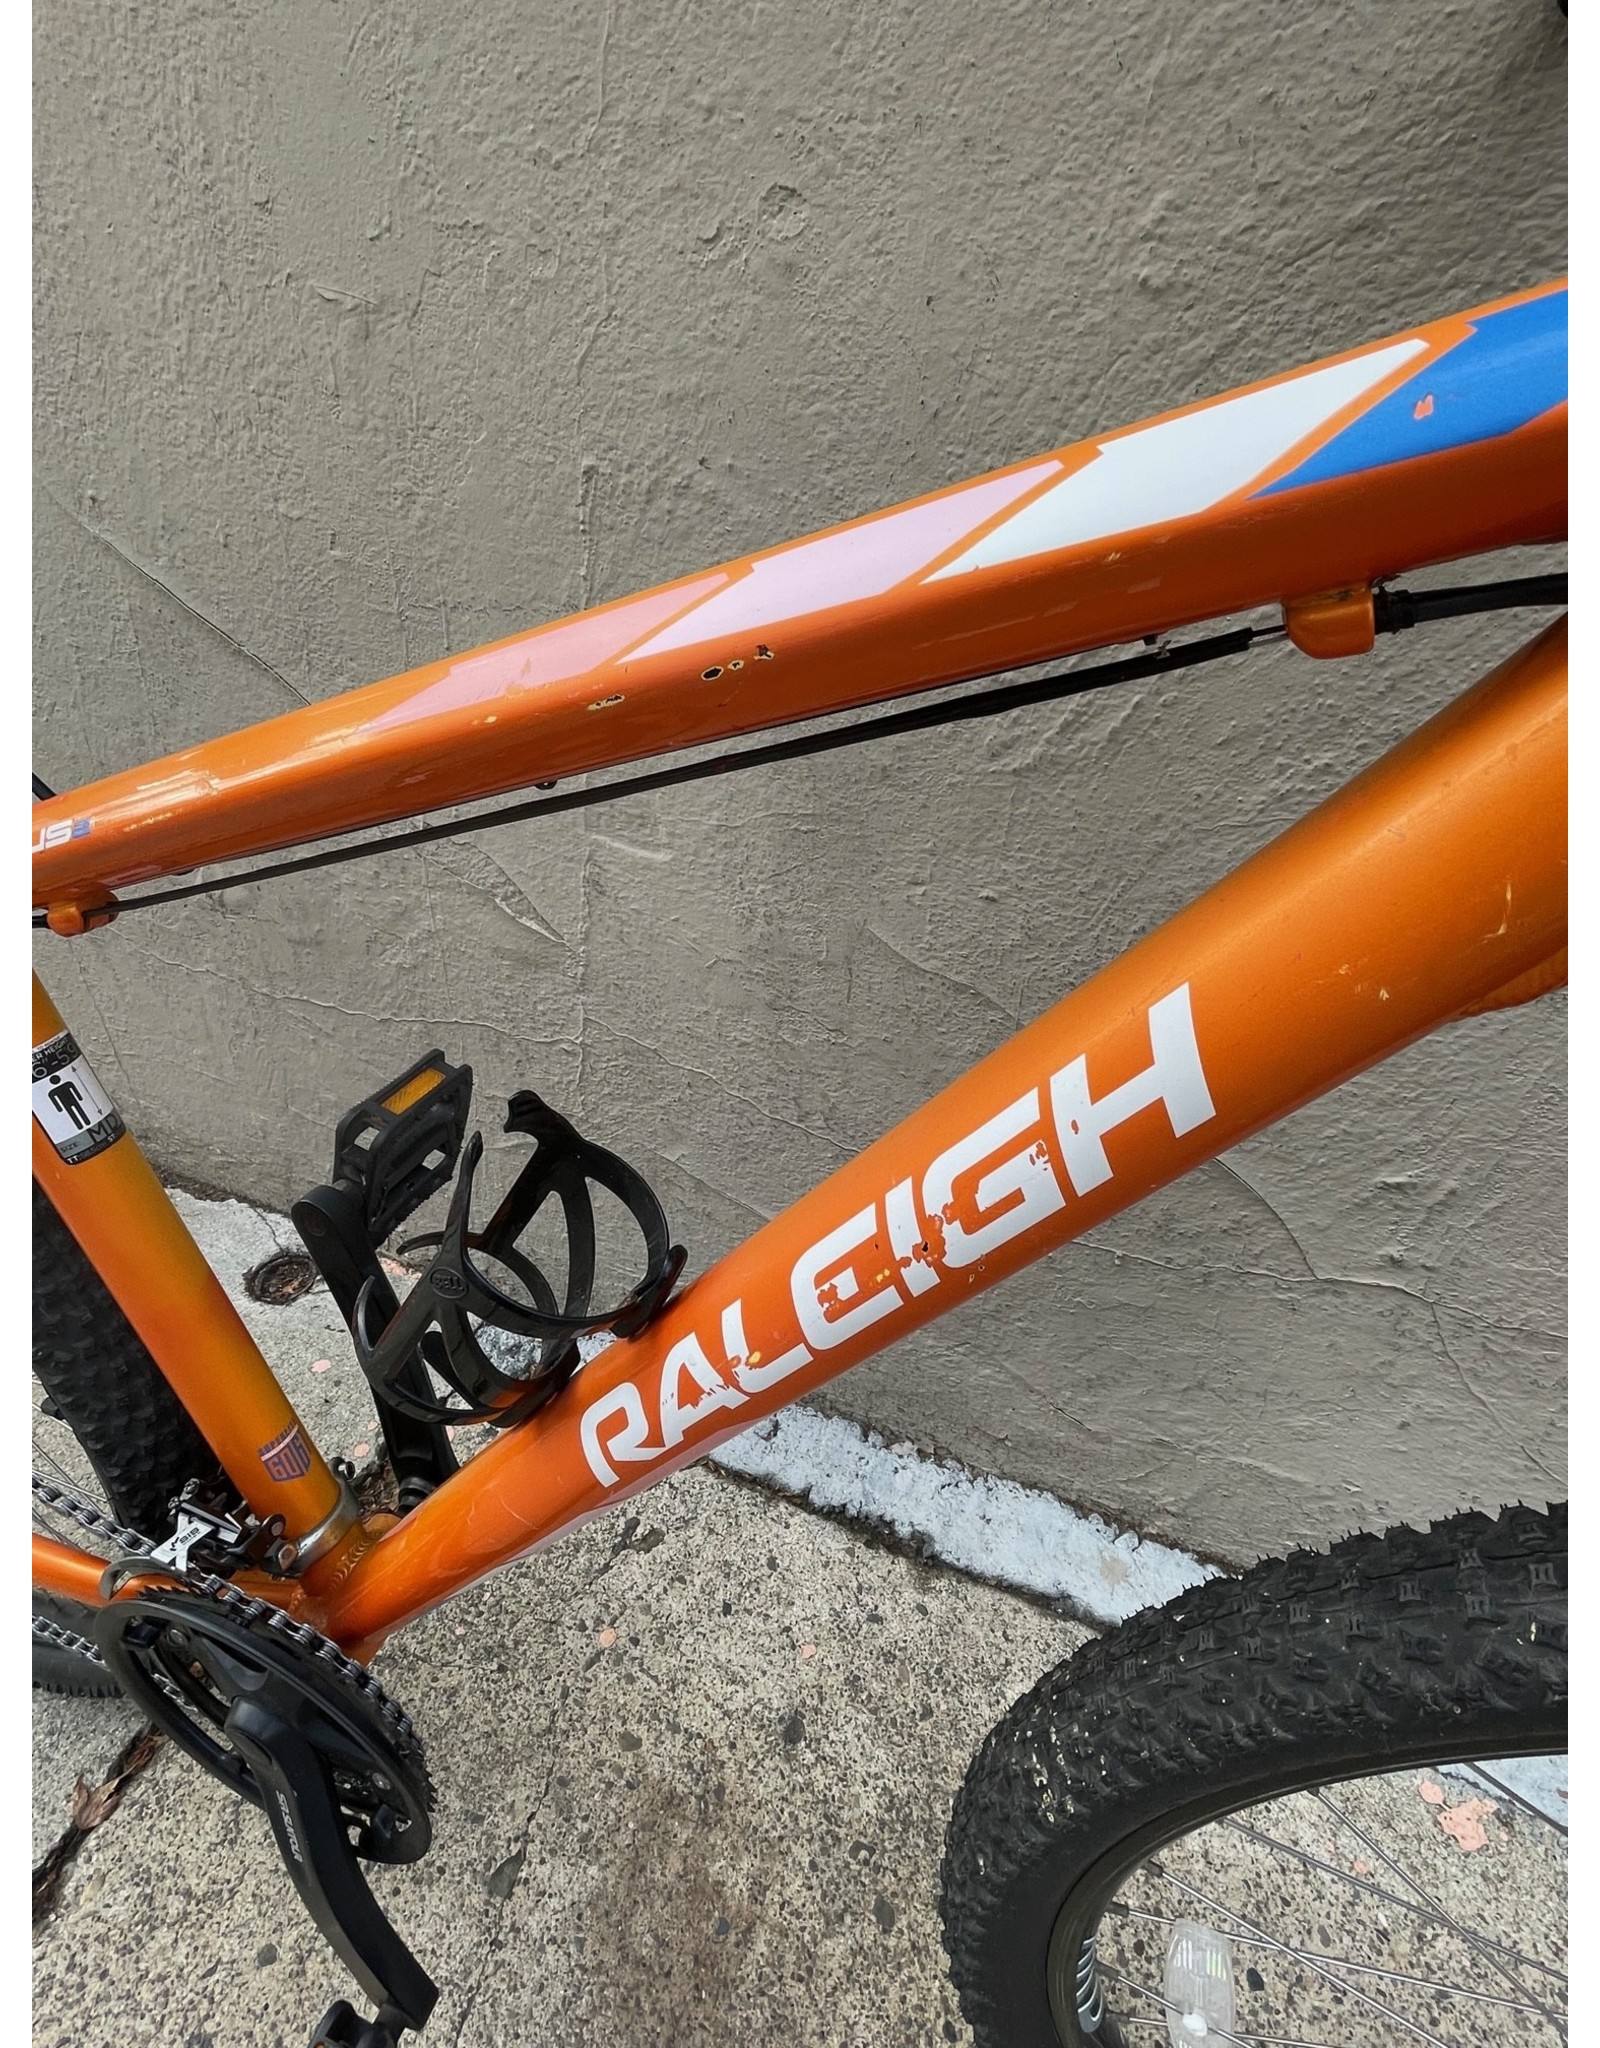 Raleigh Raleigh Talus 2, 2015, 17 Inches, Orange